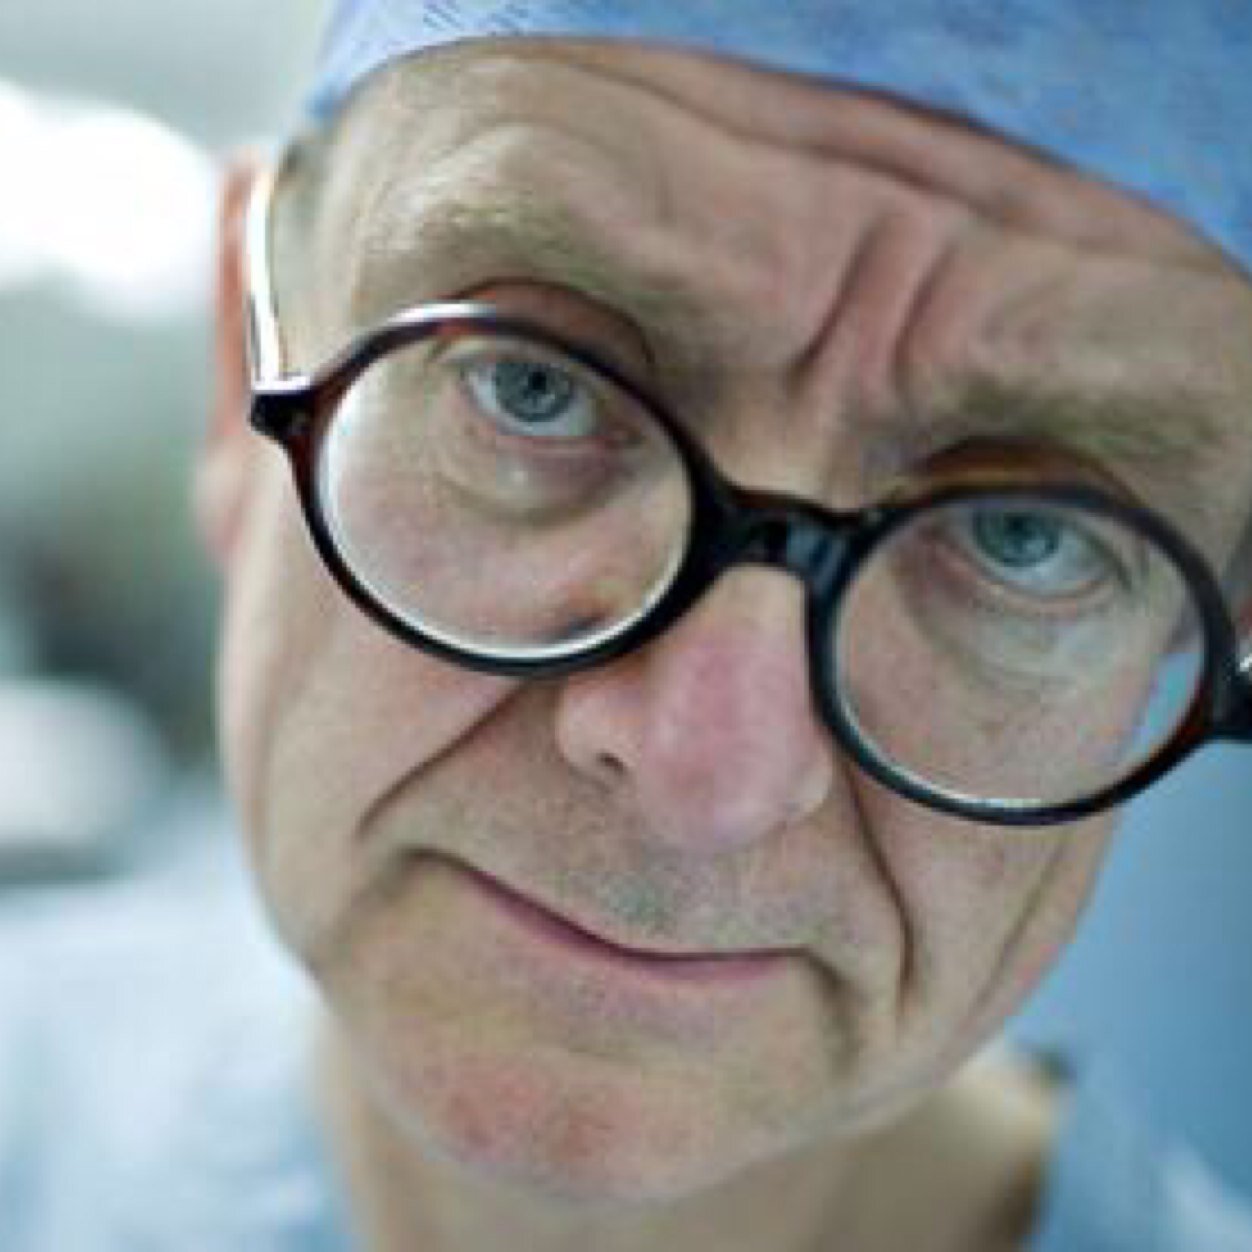 Neurosurgeon.Working in Ukraine for 30 years. Three best sellers - Do No Harm, Admissions, And Finally, about life as a brain surgeon and then cancer patient.